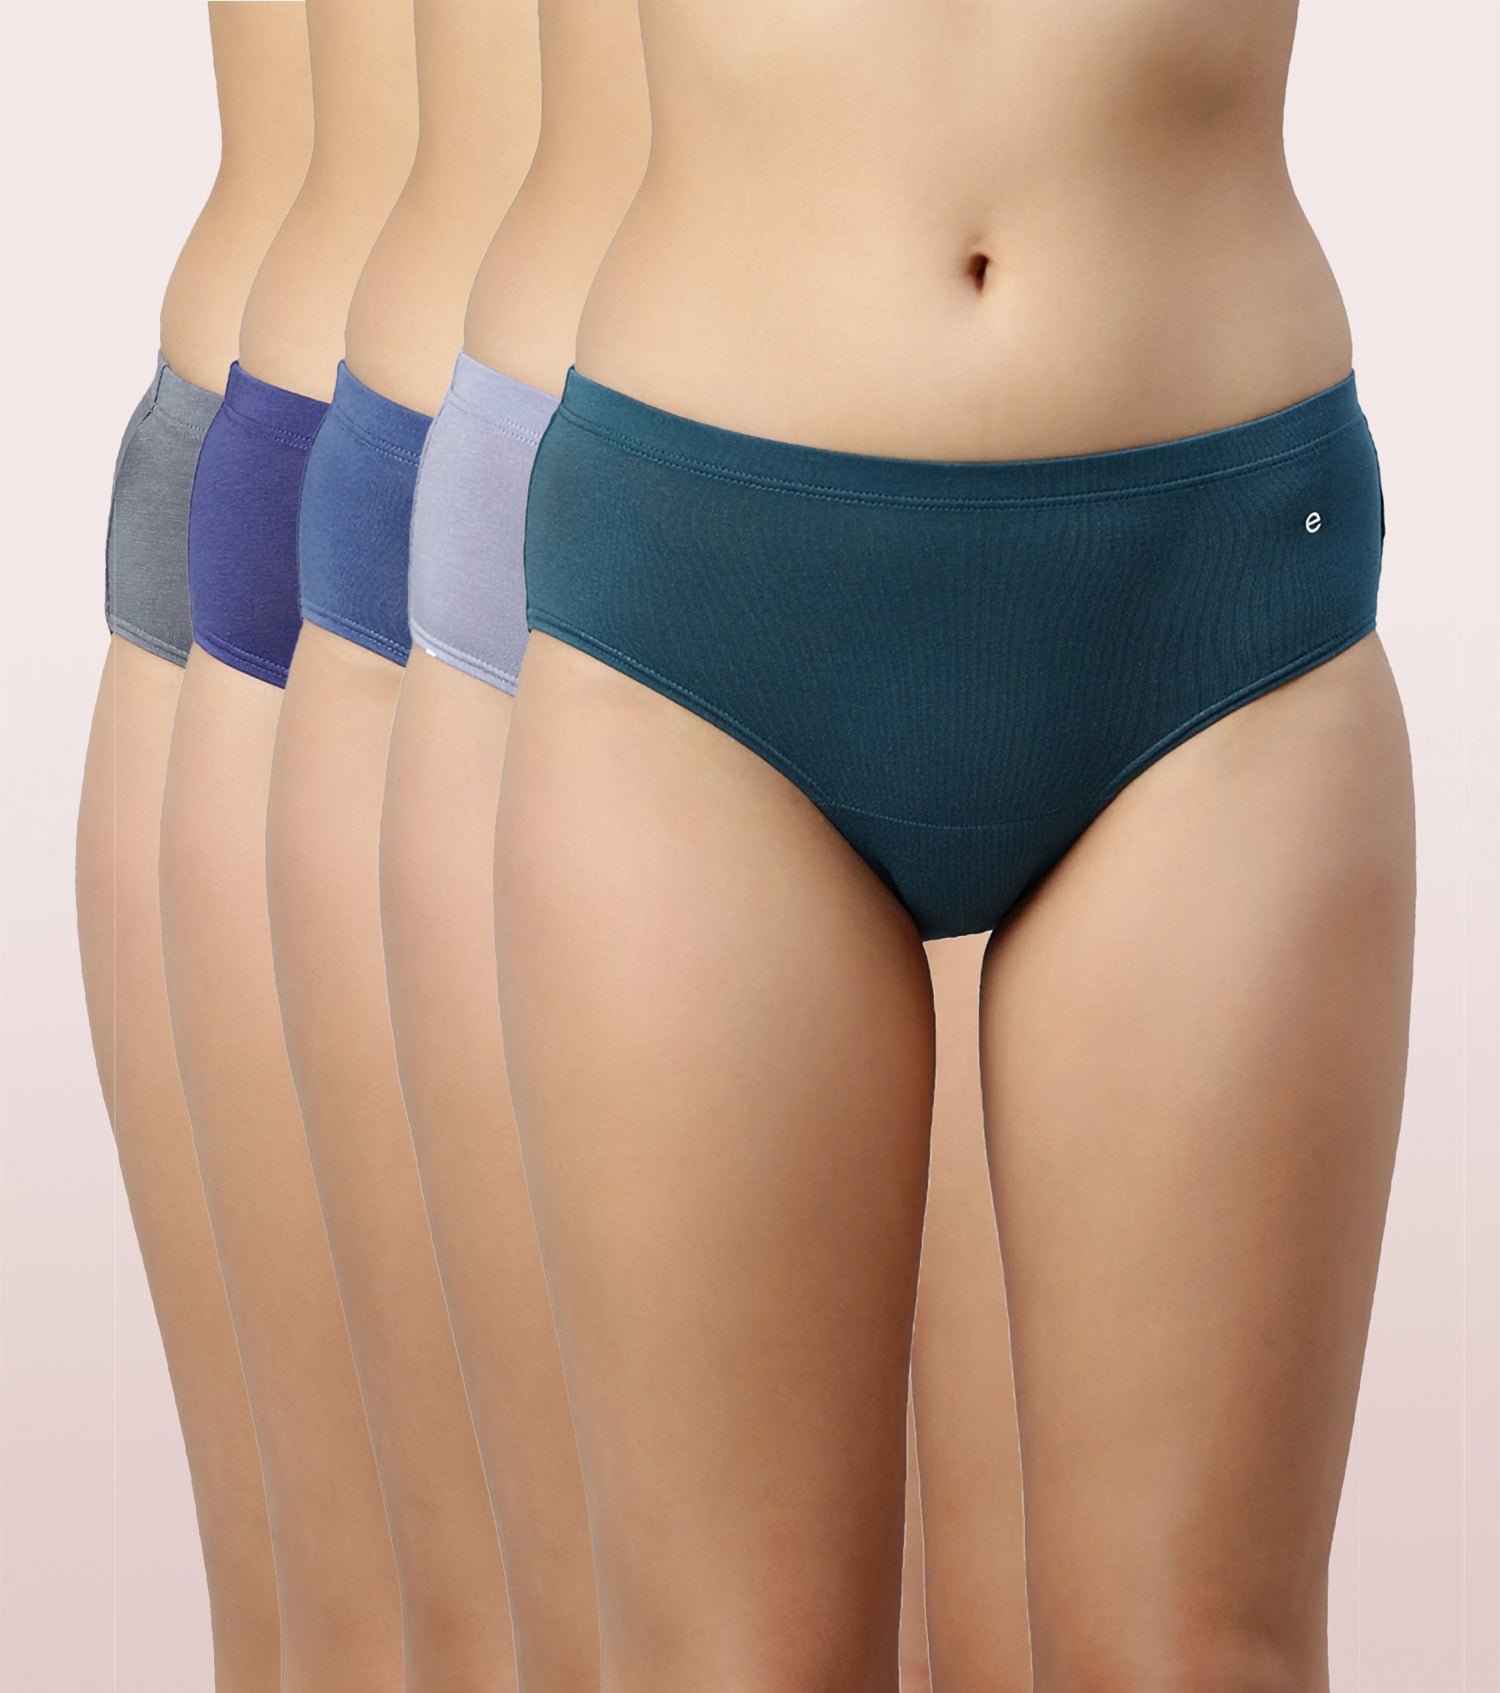 Old Panty, Price and other details may vary based on product size and color.